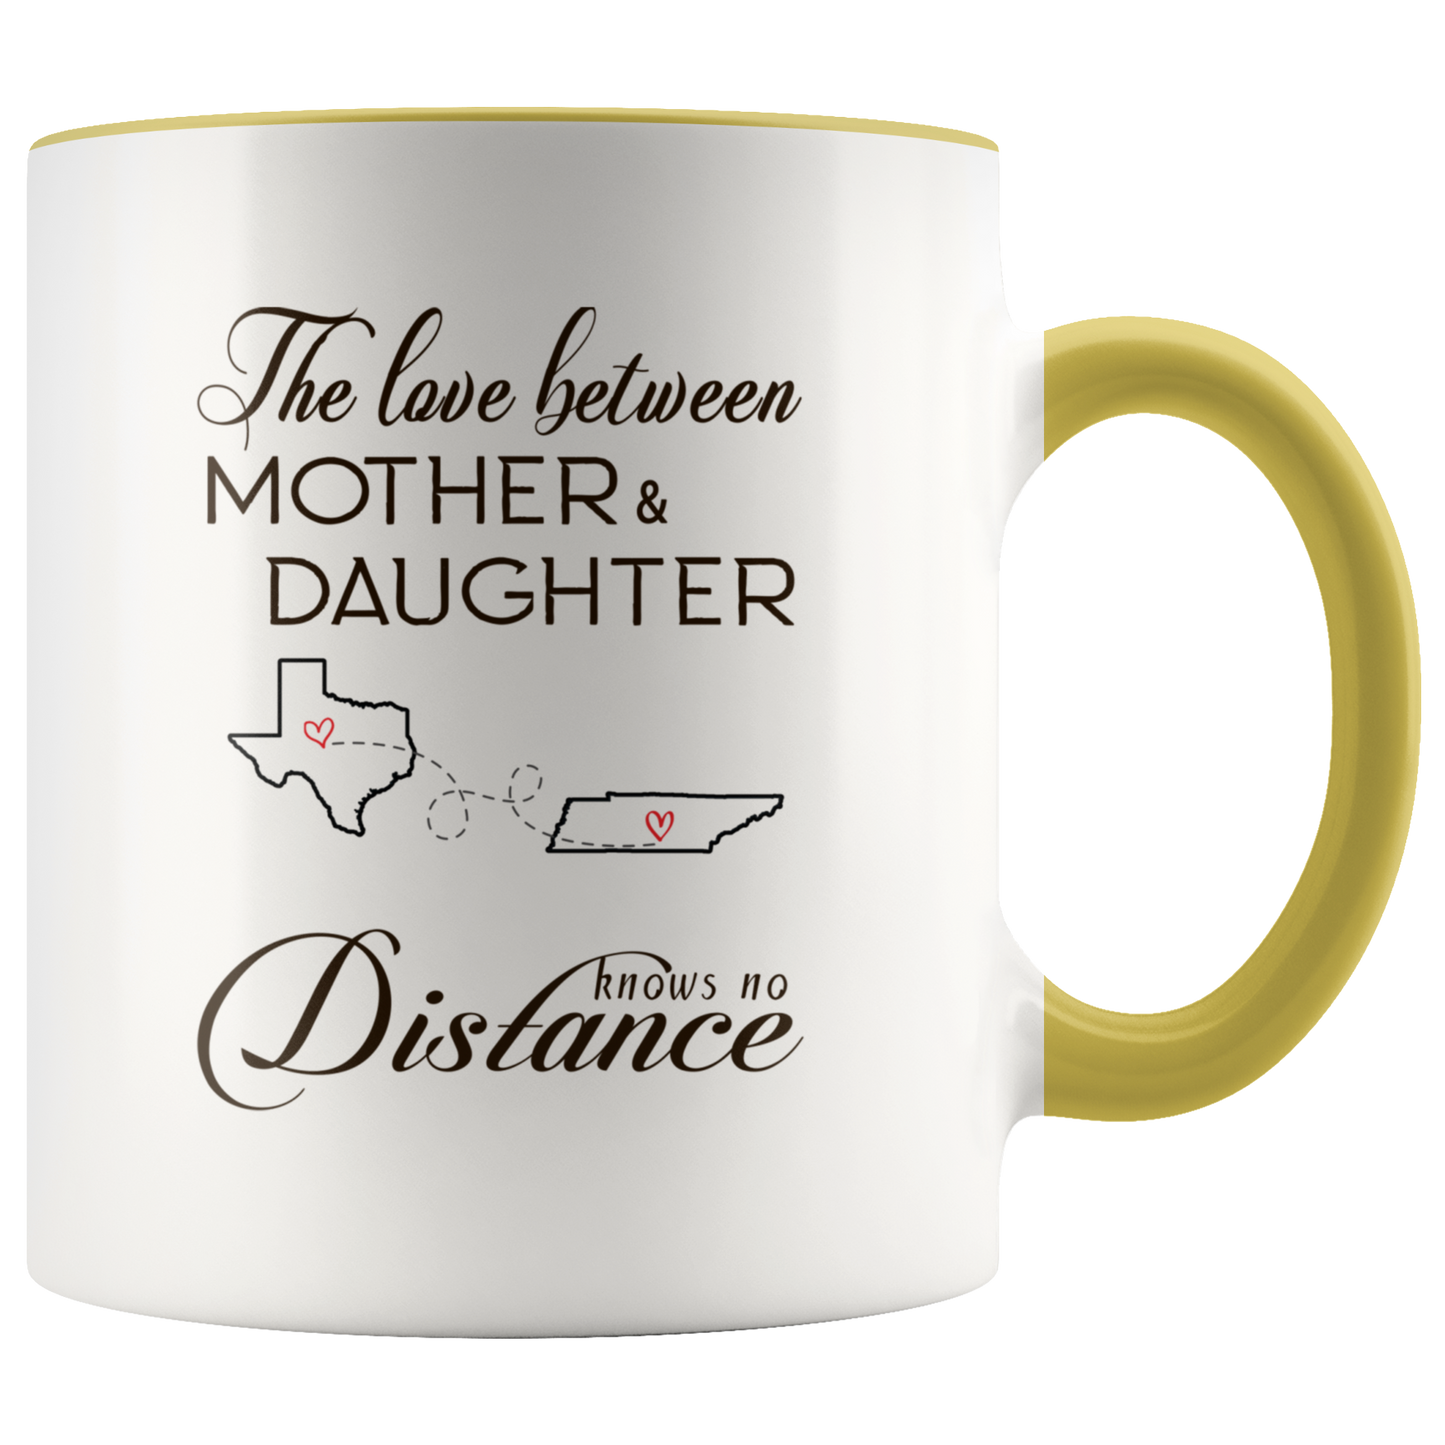 ND-21334245-sp-23759 - [ Texas | Tennessee ]Long Distance Accent Mug 11 oz Red - The Love Between Mother